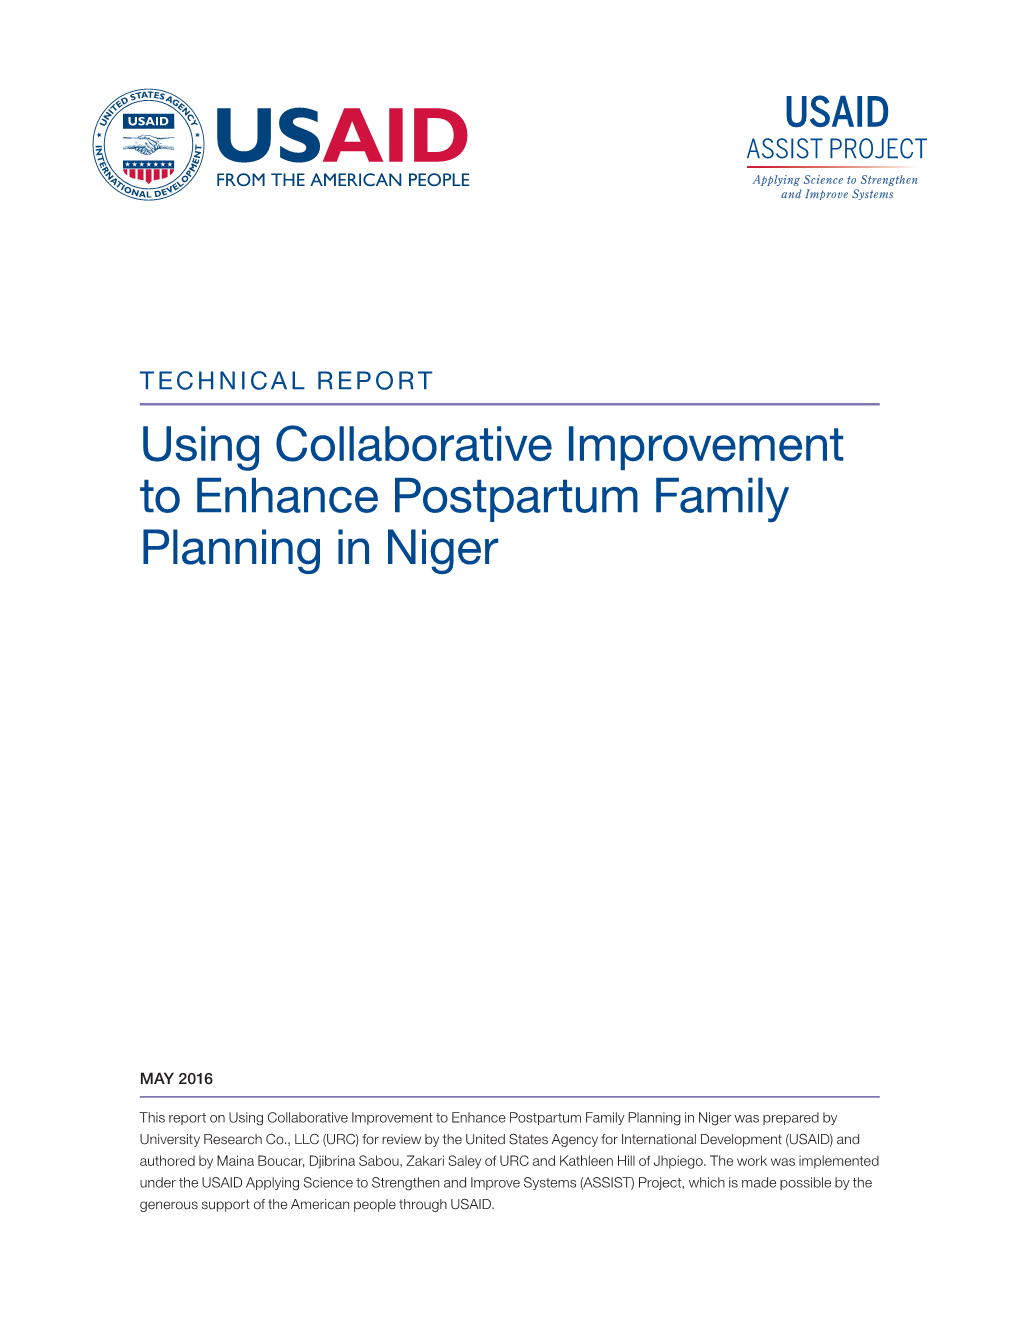 Using Collaborative Improvement to Enhance Postpartum Family Planning in Niger